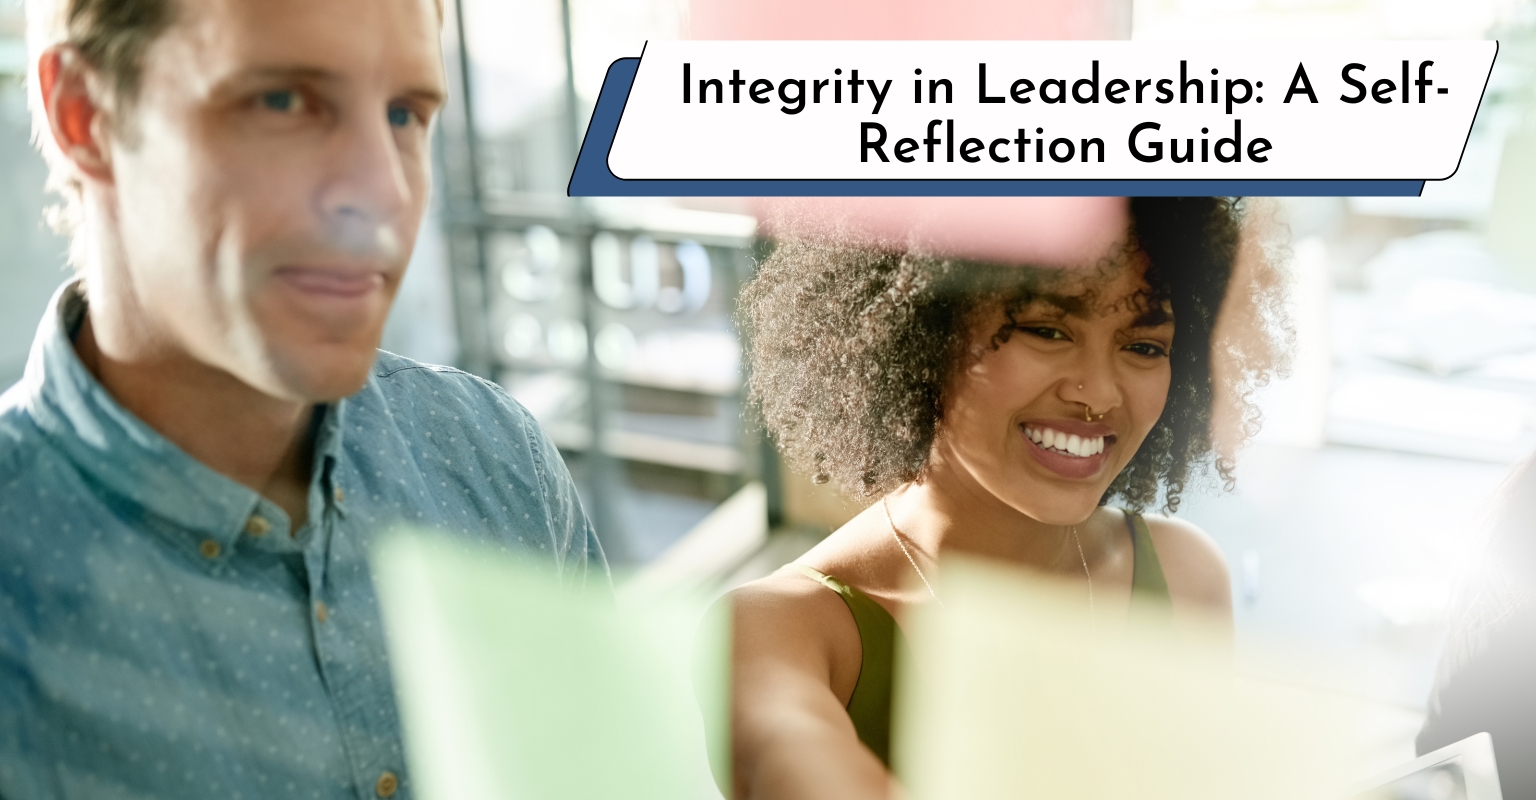 Leader Reflecting on Integrity and Trustworthiness in the Workplace